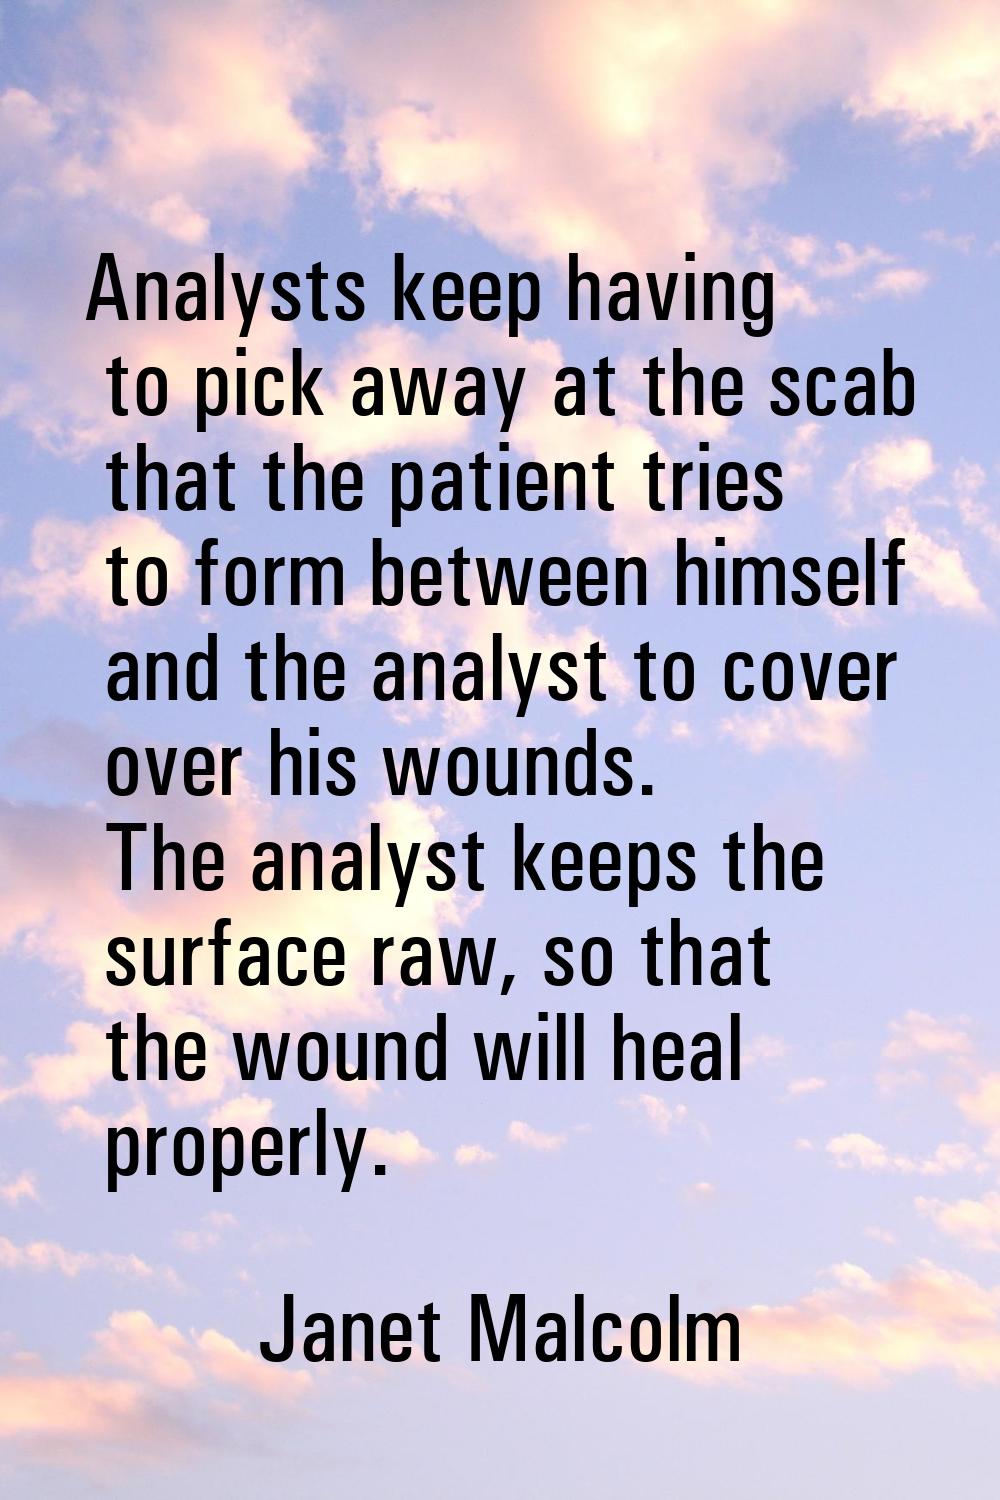 Analysts keep having to pick away at the scab that the patient tries to form between himself and th